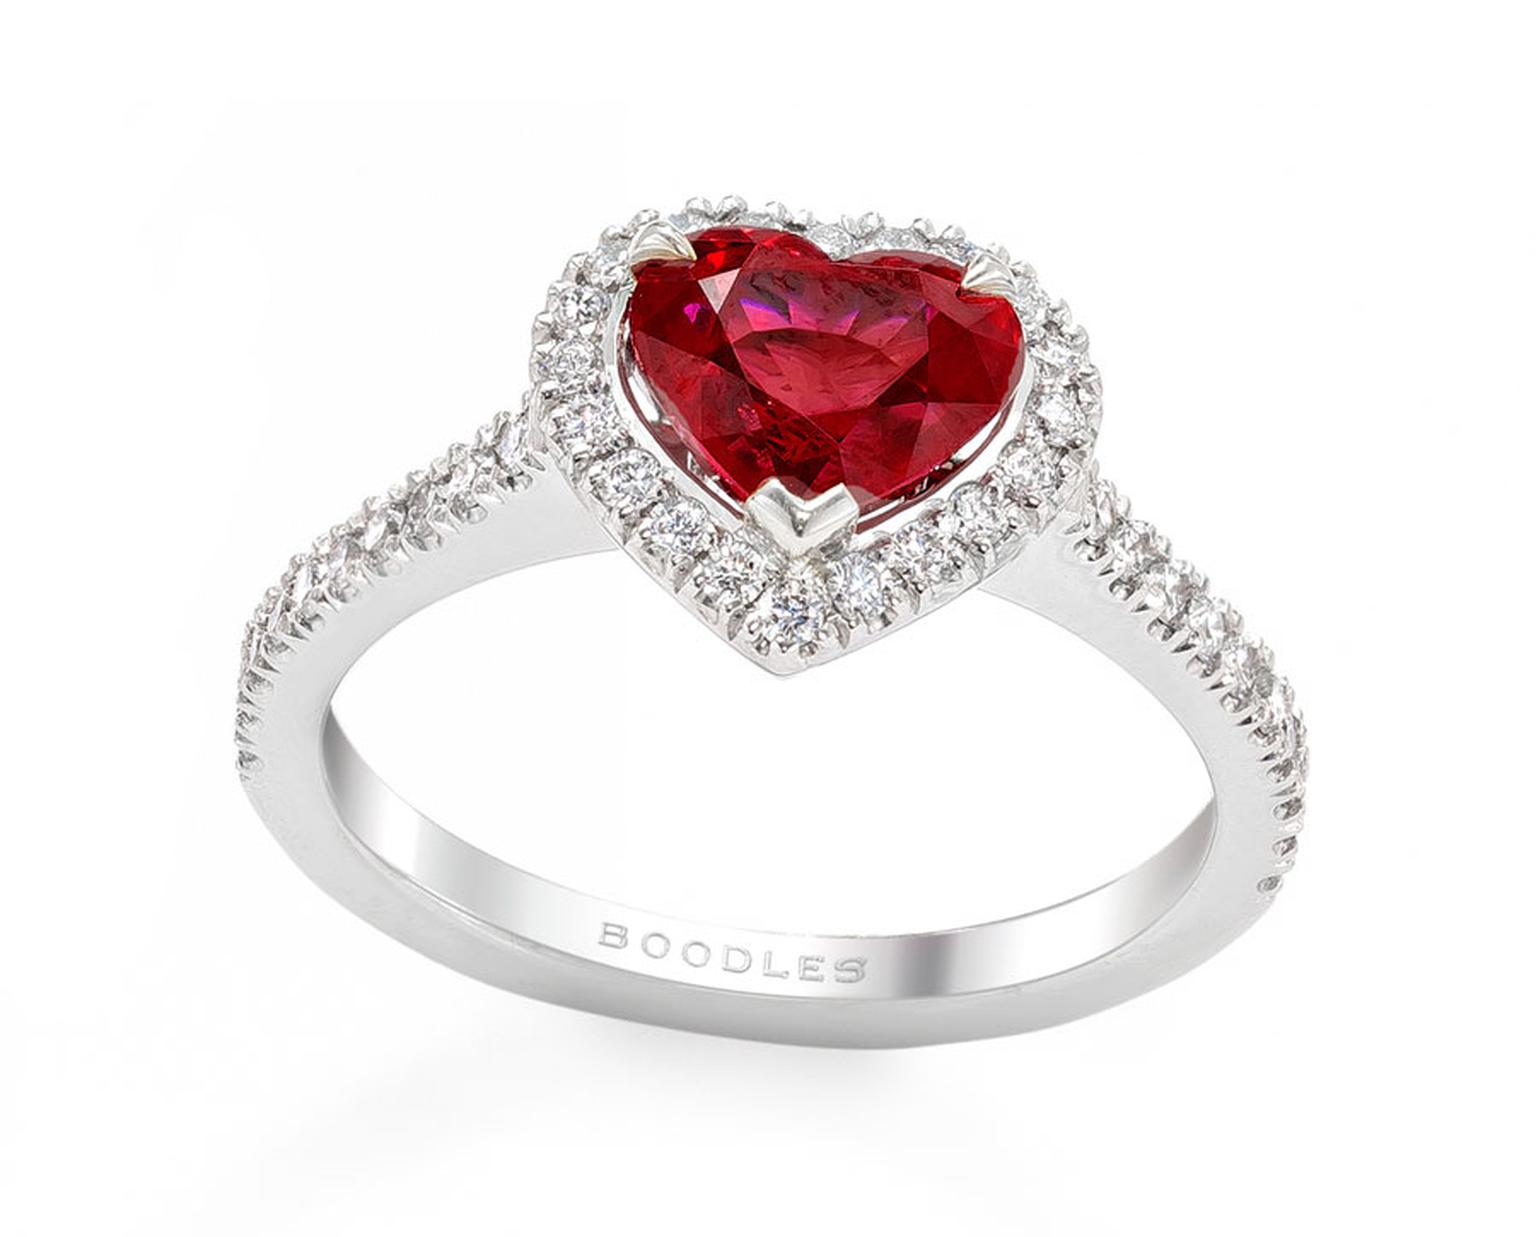 Boodles-pages64-65_5-VALENTINES